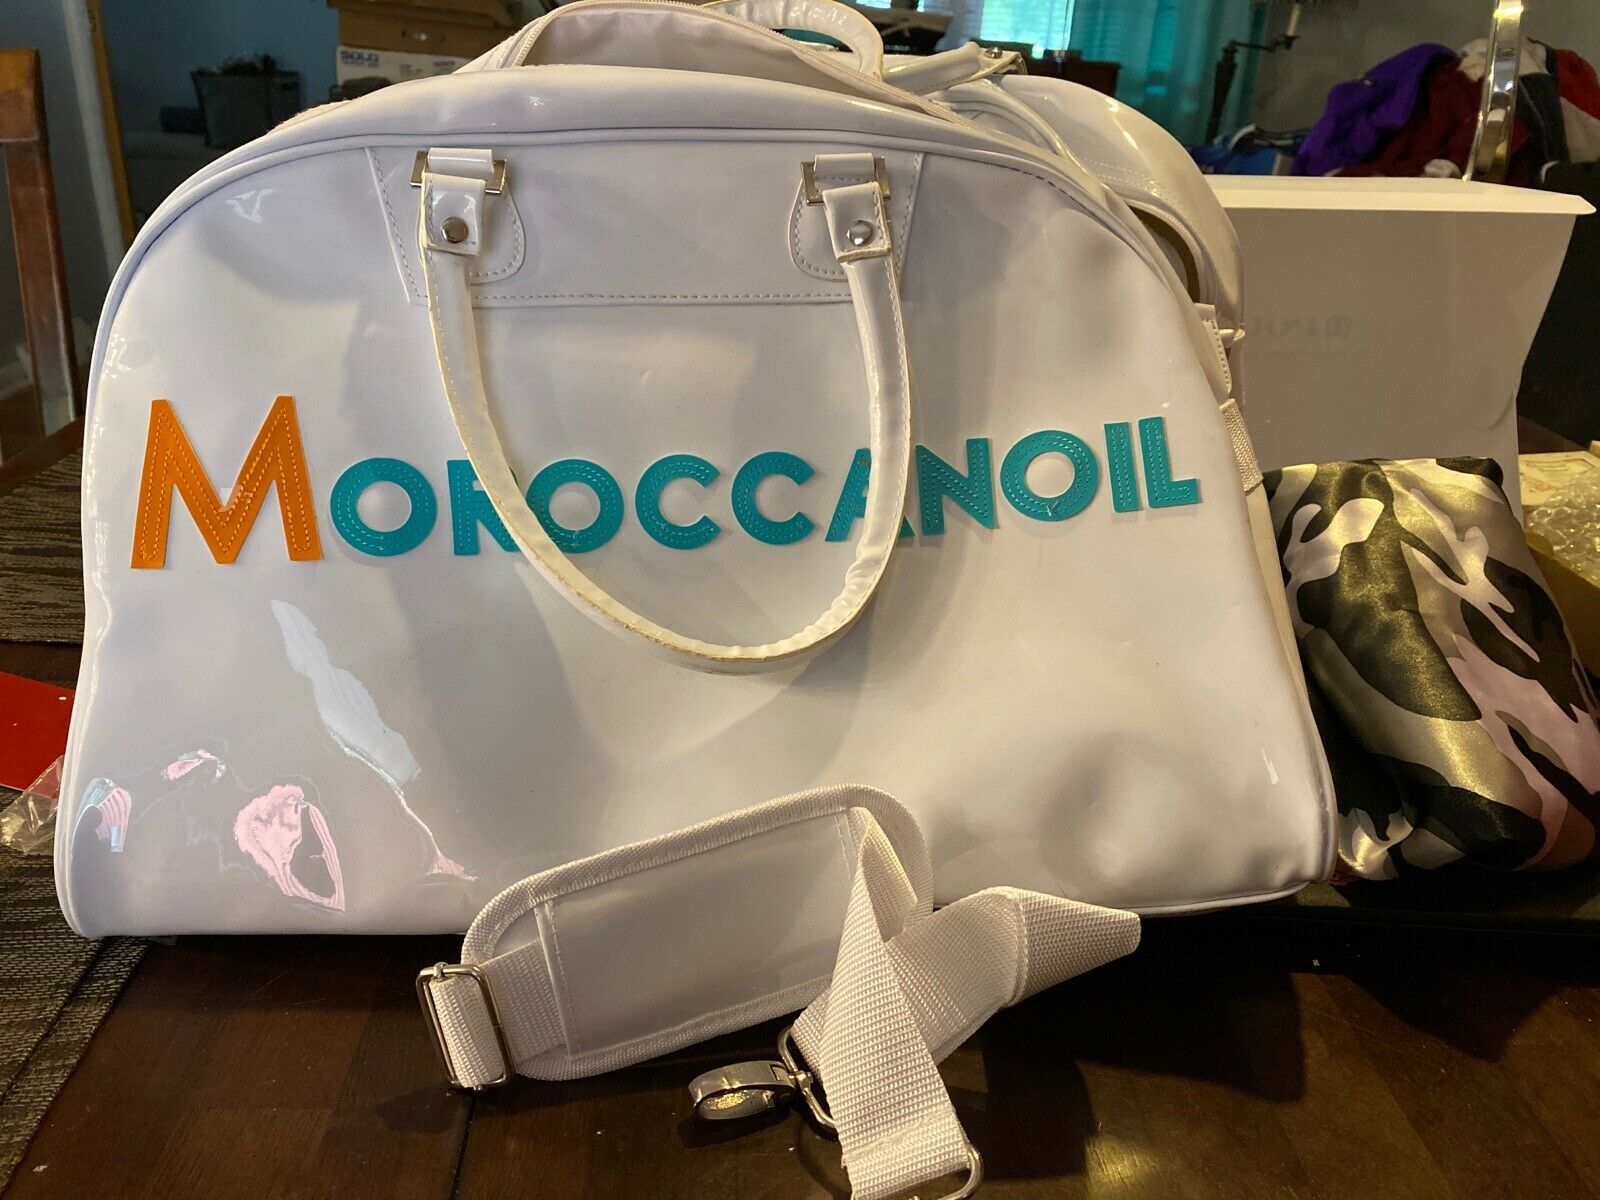 Moroccan Oil Large White Vinyl Tote Gym Overnight Travel Duffle Bag